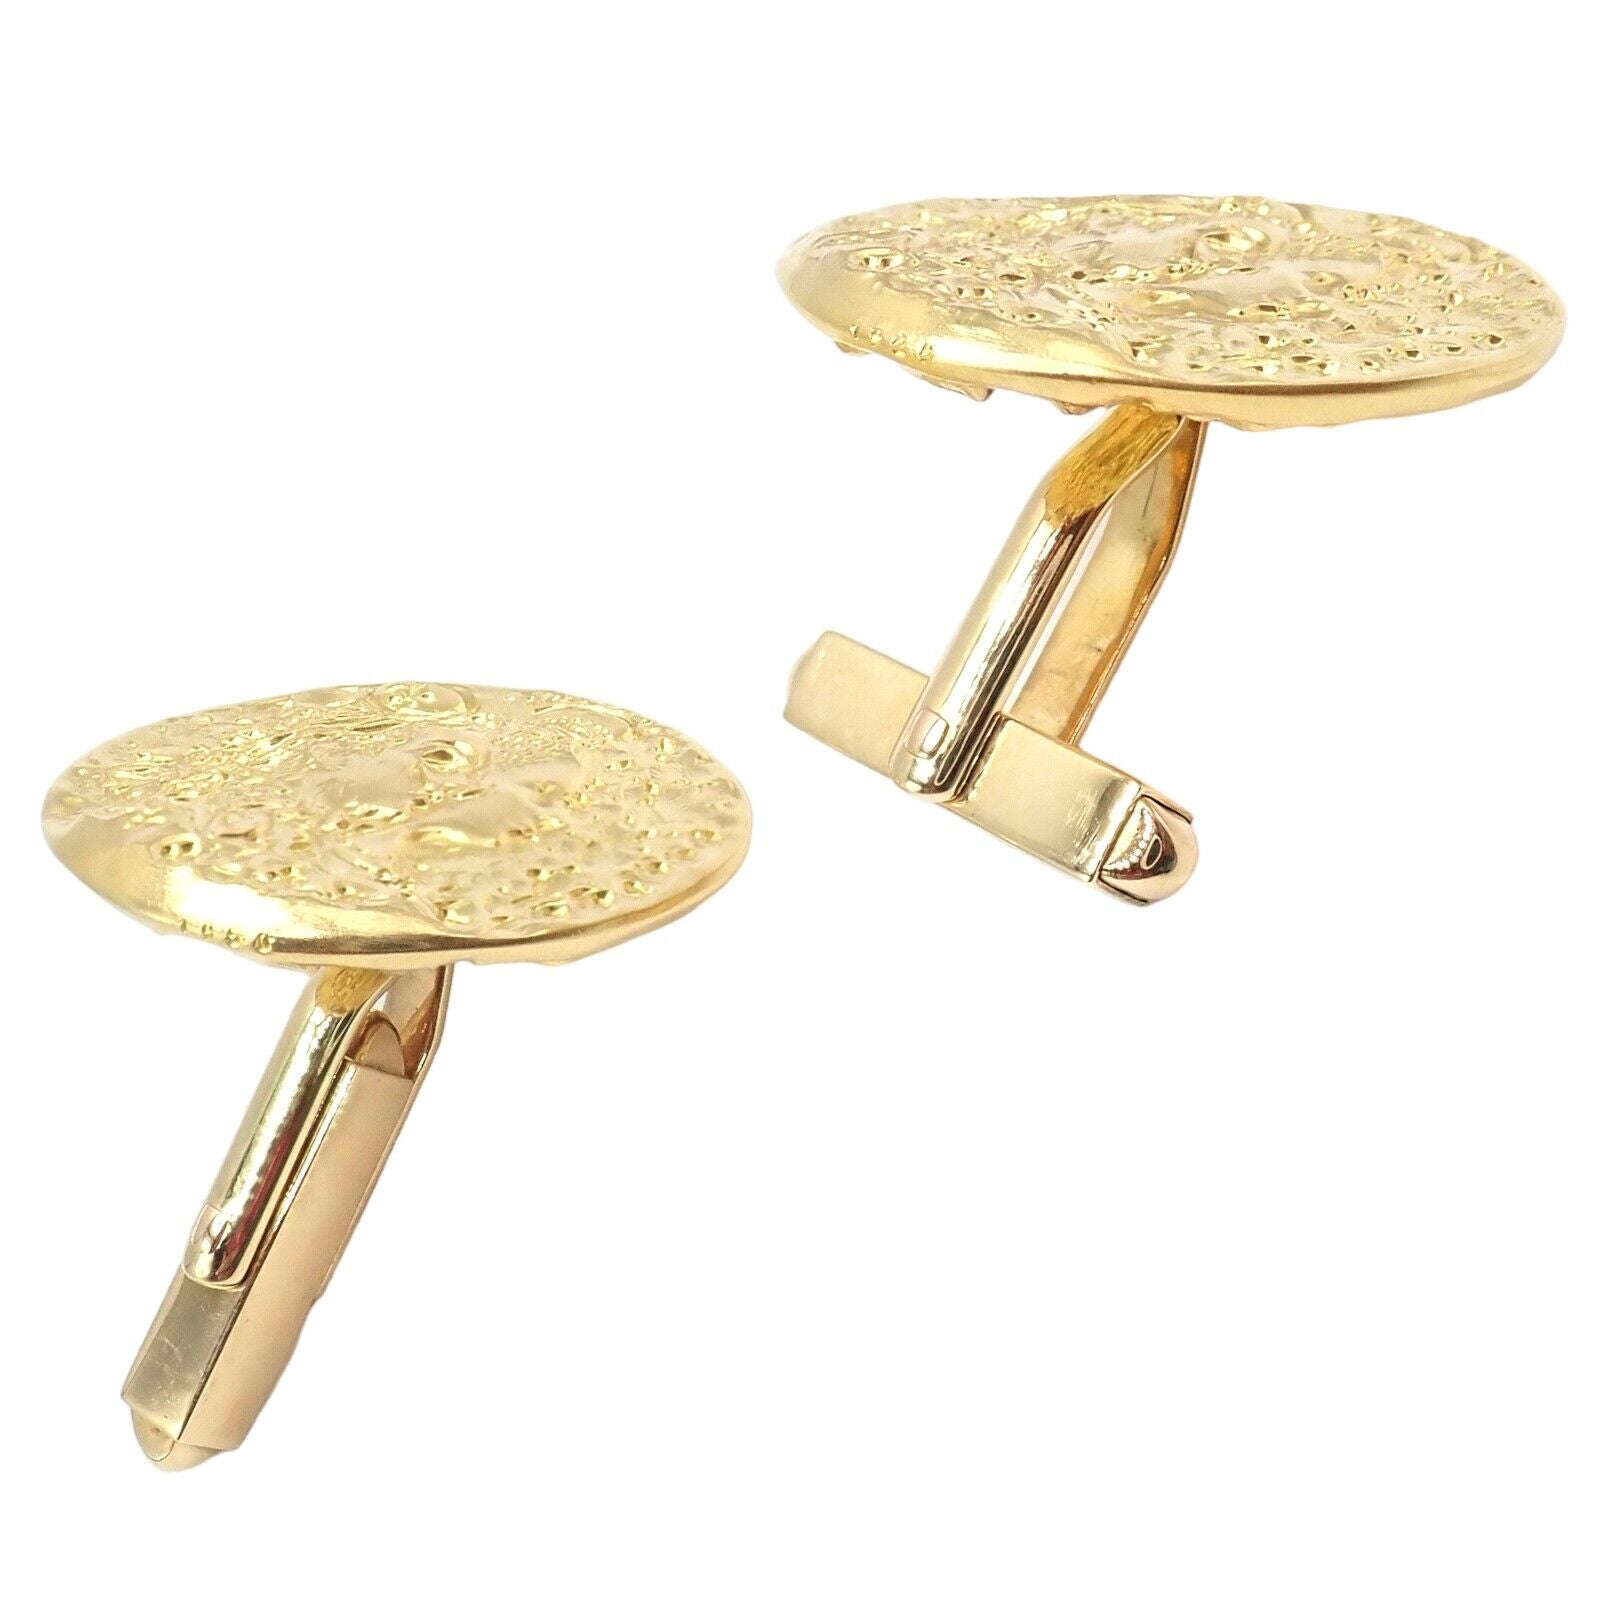 Salvador Dali for Piaget Jewelry & Watches:Men's Jewelry:Cufflinks Authentic Salvador Dali D'or for Piaget 18k & 22k Yellow Gold Cufflinks